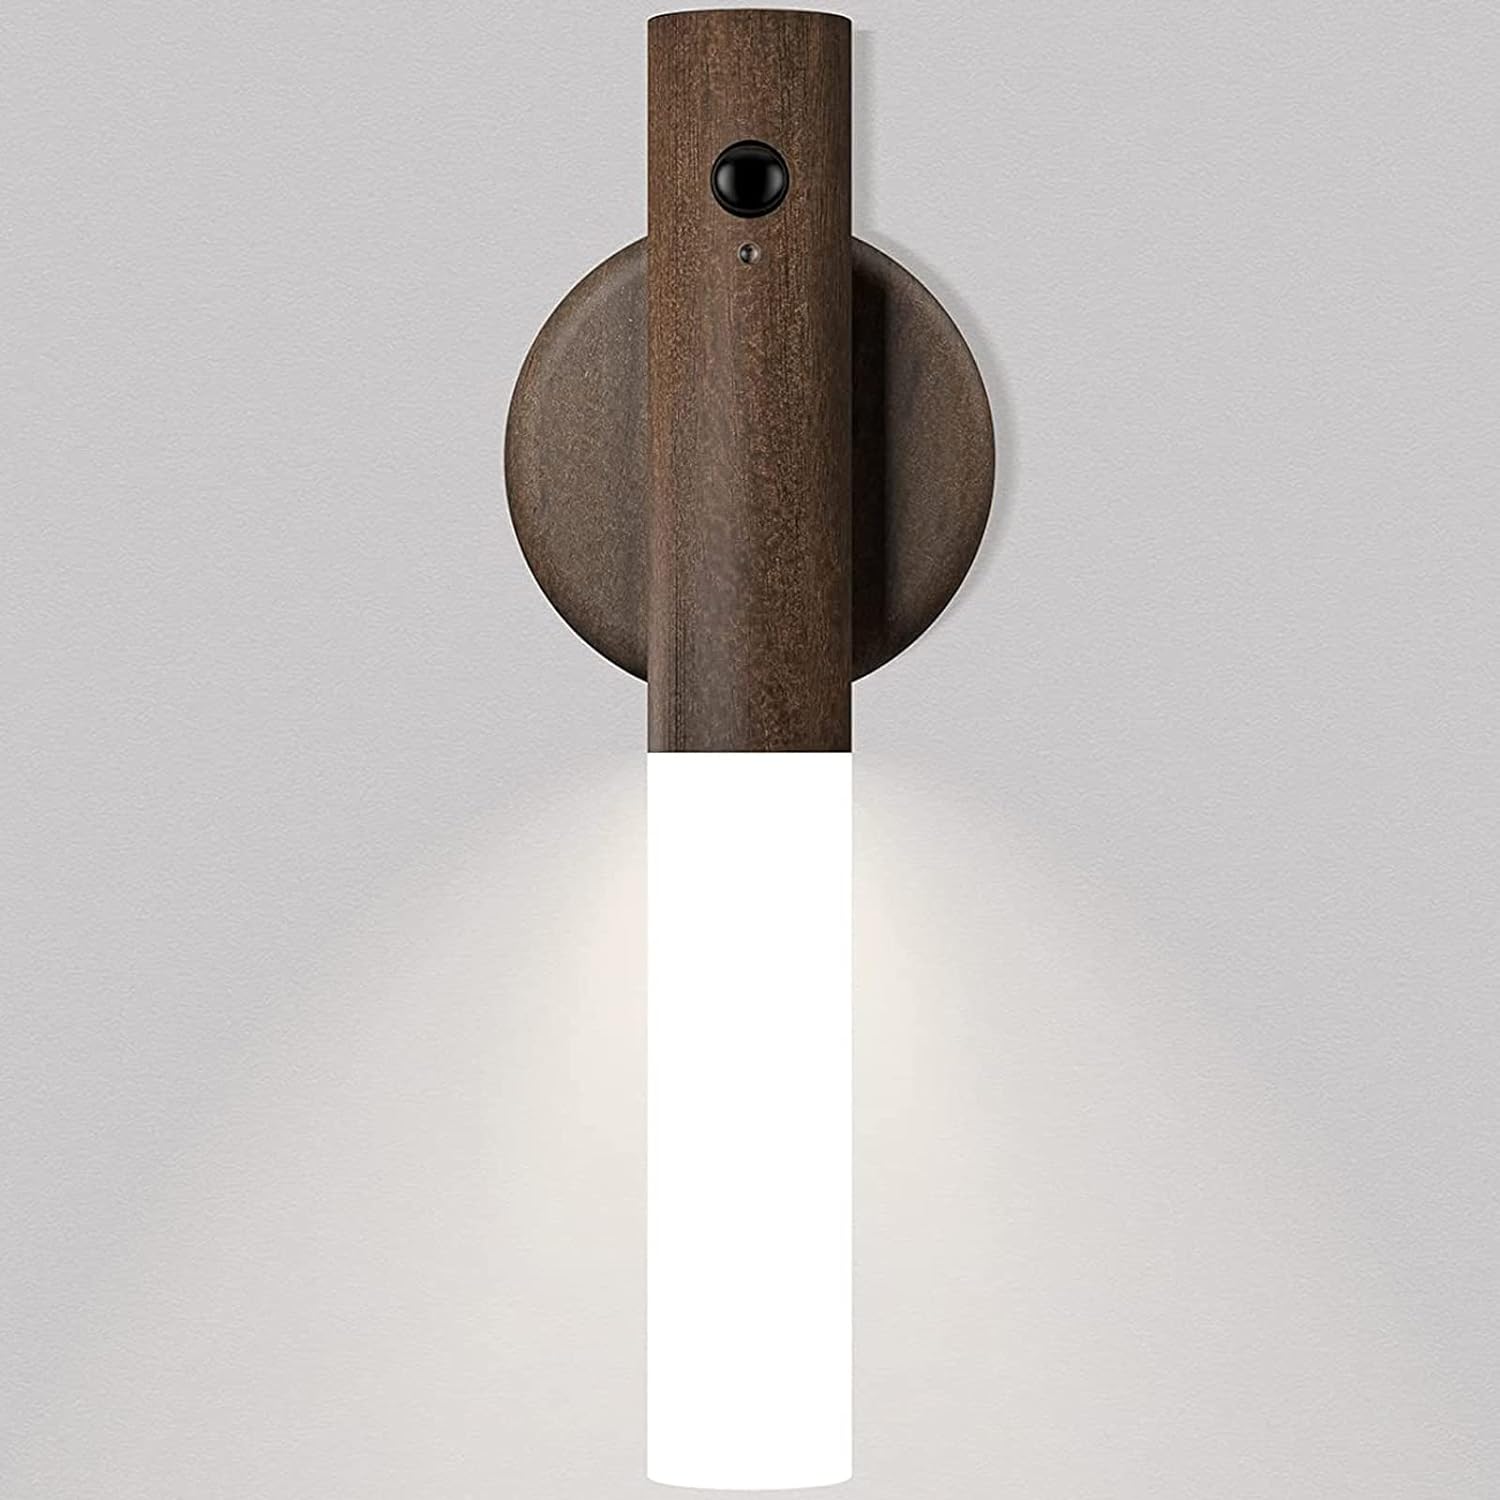 Sensor Night Light, Magnetic LED Wall Lights Rechargeable Sensor Night Light Indoor Wooden Wall Sconce for Bedroom Corridor Staircase